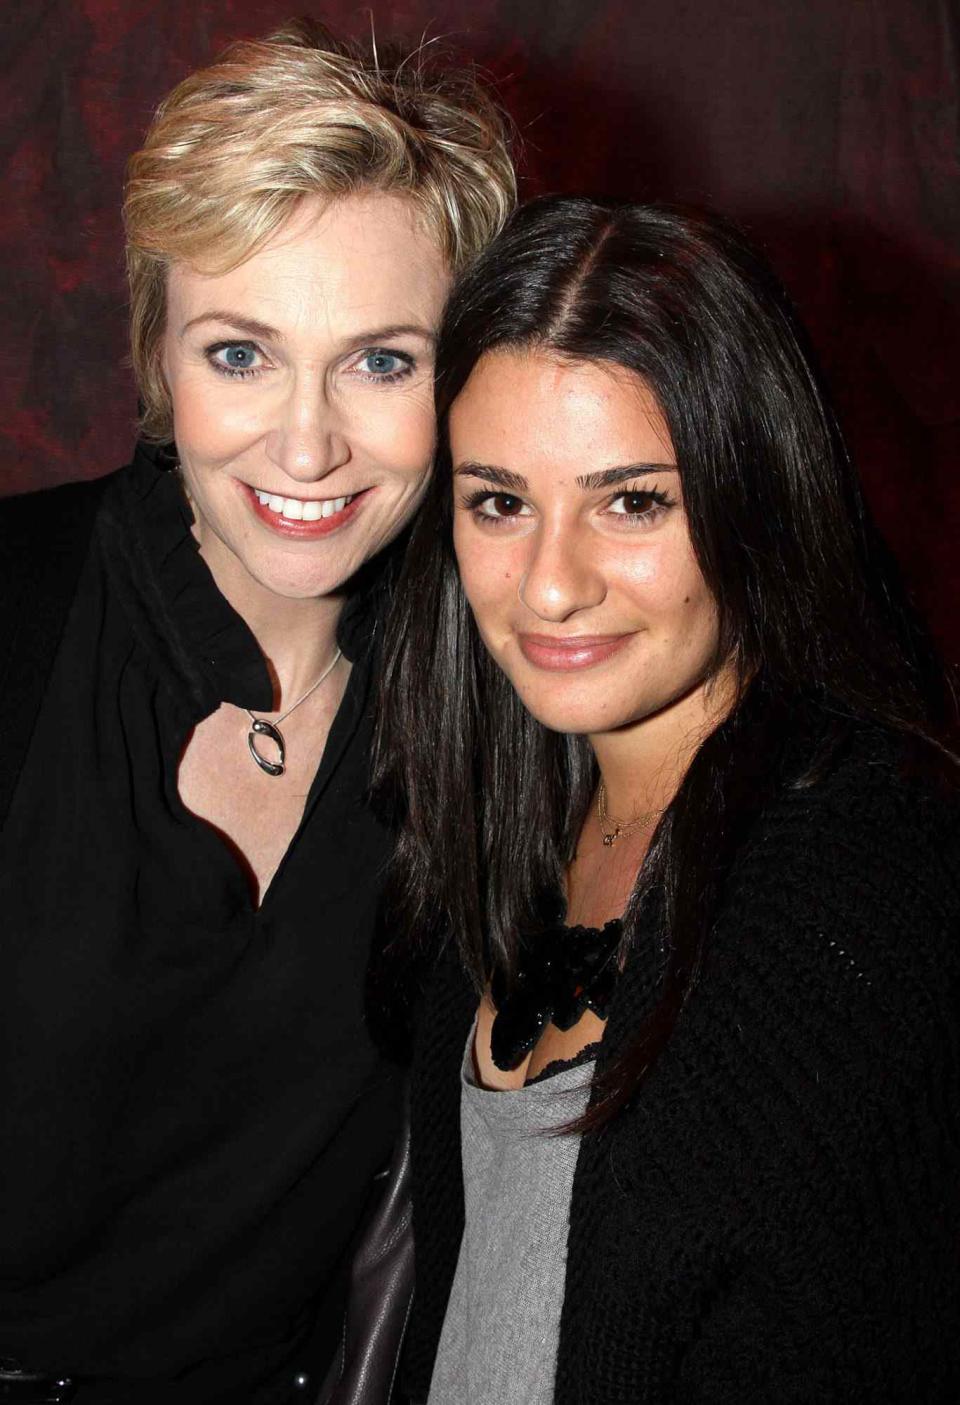 Jane Lynch and Lea Michele pose backstage at Love, Loss and What I Wore at The Westside Theater